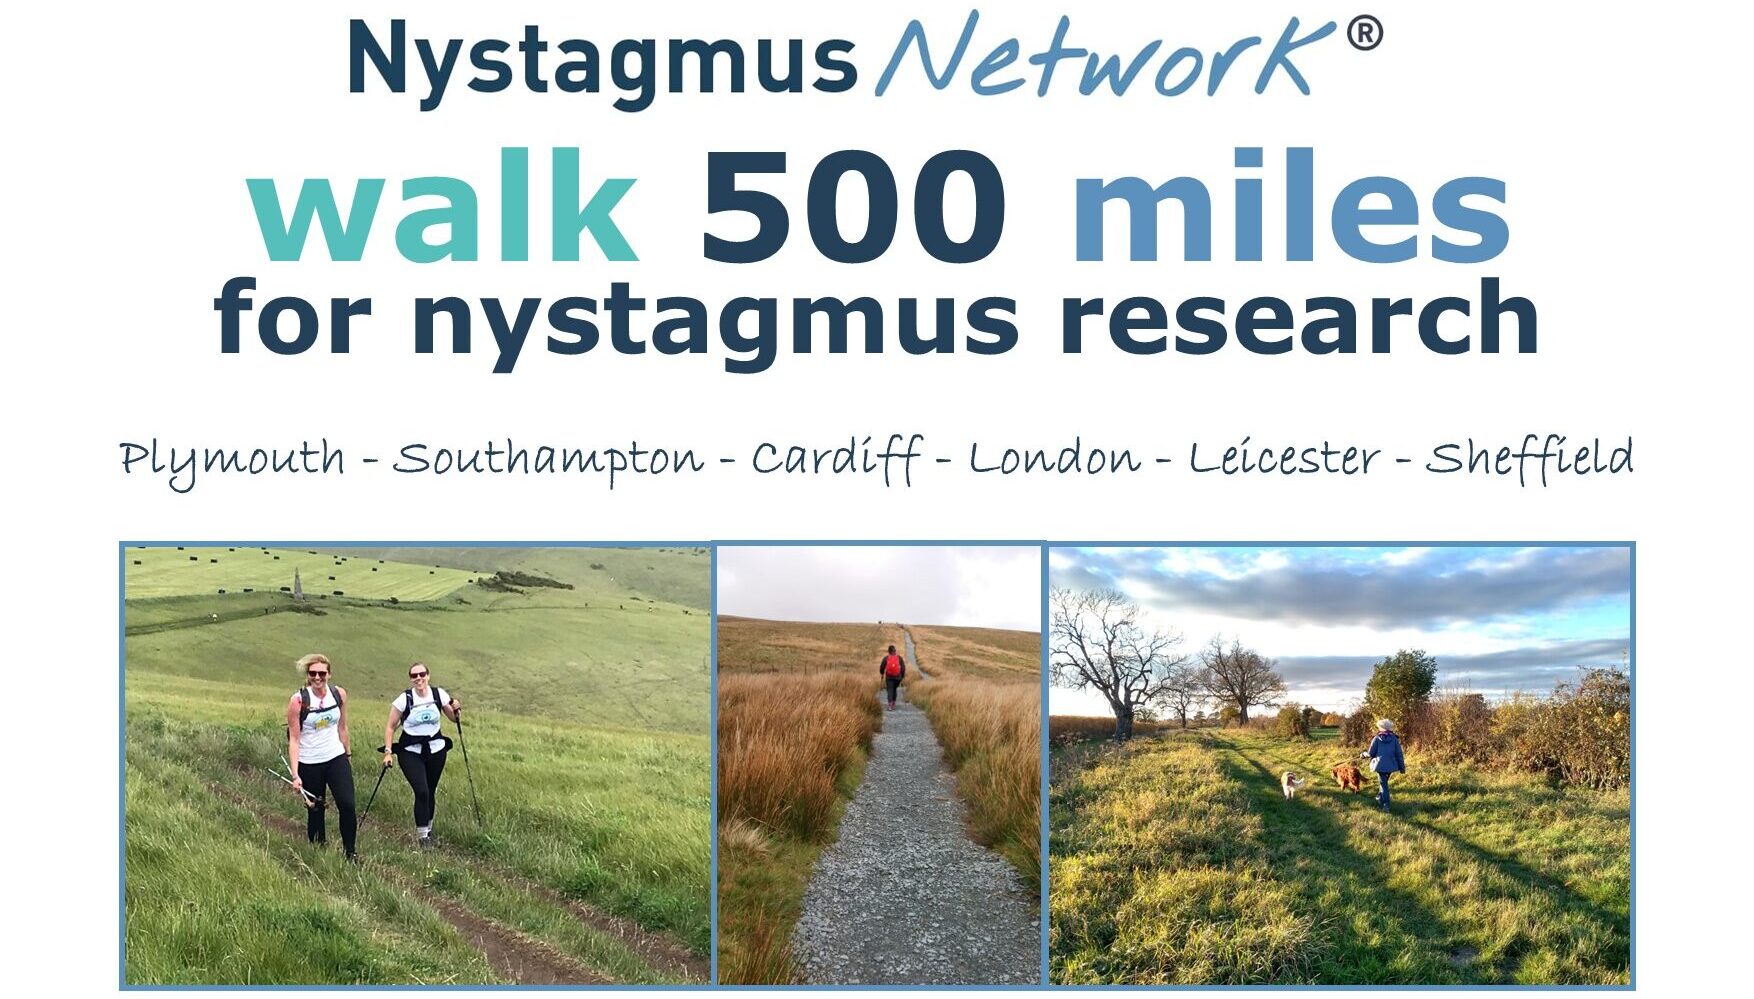 A postcard with pictures of people walking and the words Nystagmus Network walk 500 miles for nystagmus research.